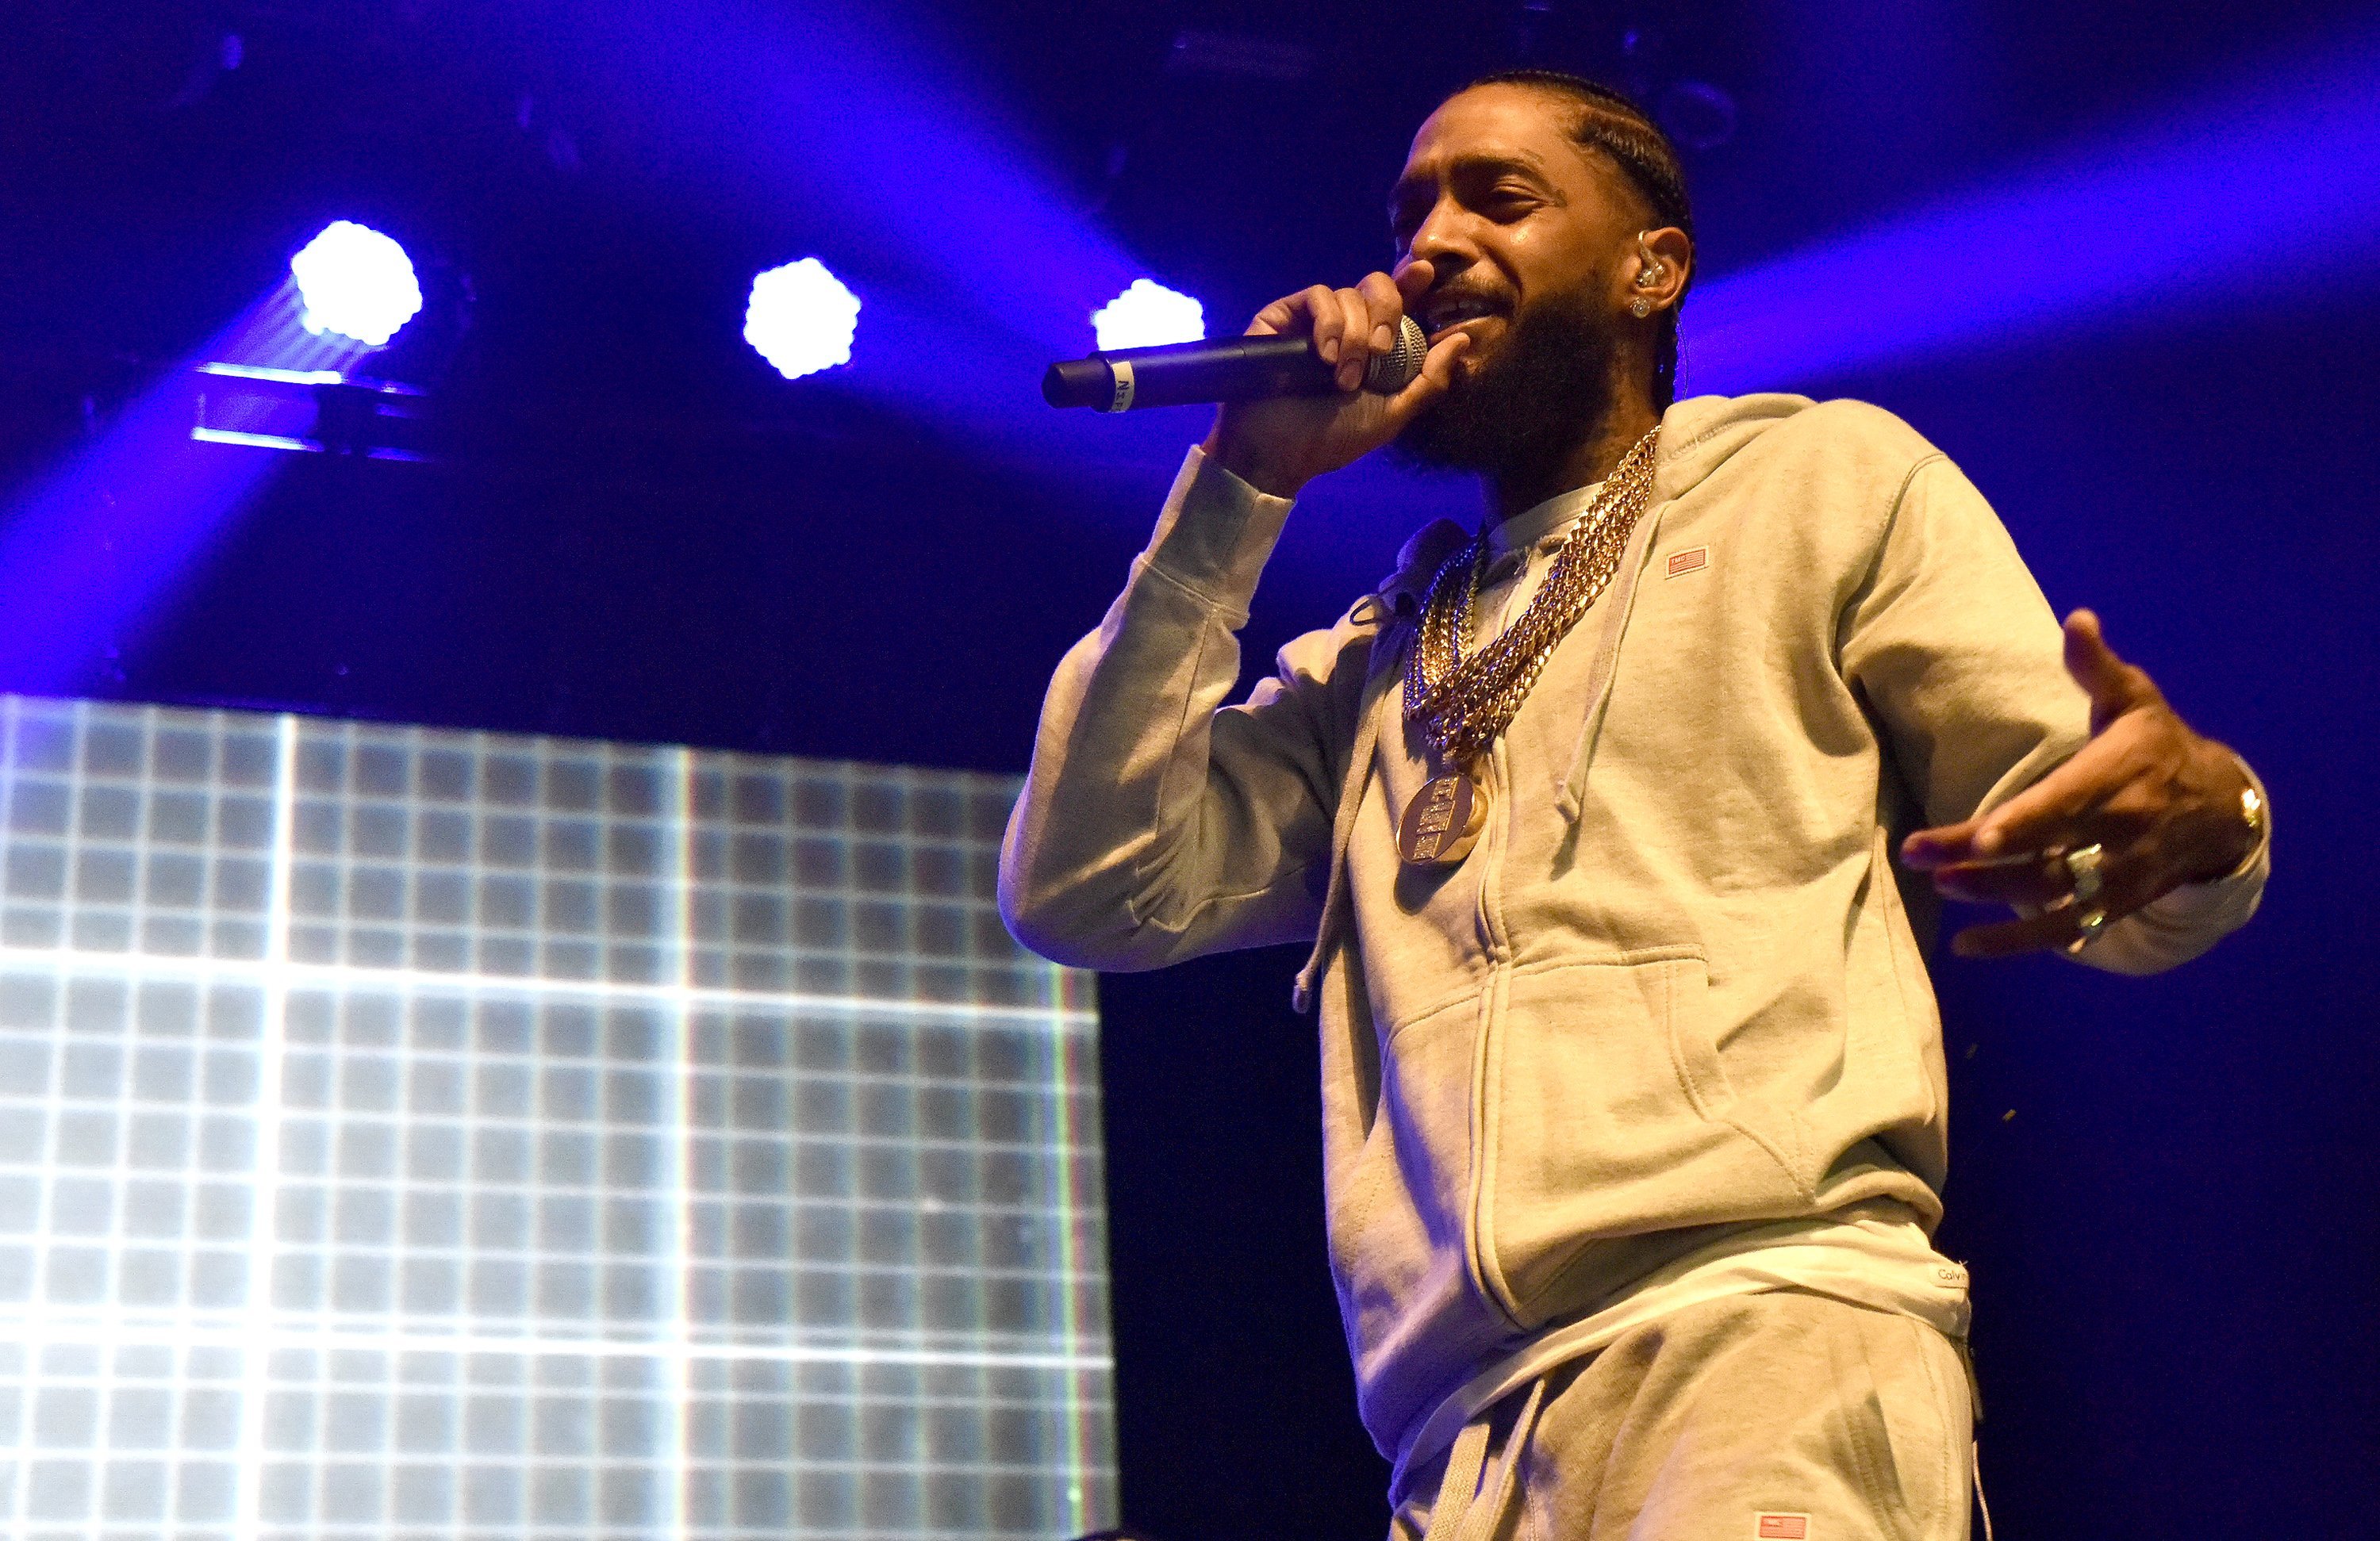 Nipsey Hussle performing at The Warfield during his 'Victory Lap Tour'  in San Francisco, California | Photo: Getty Images